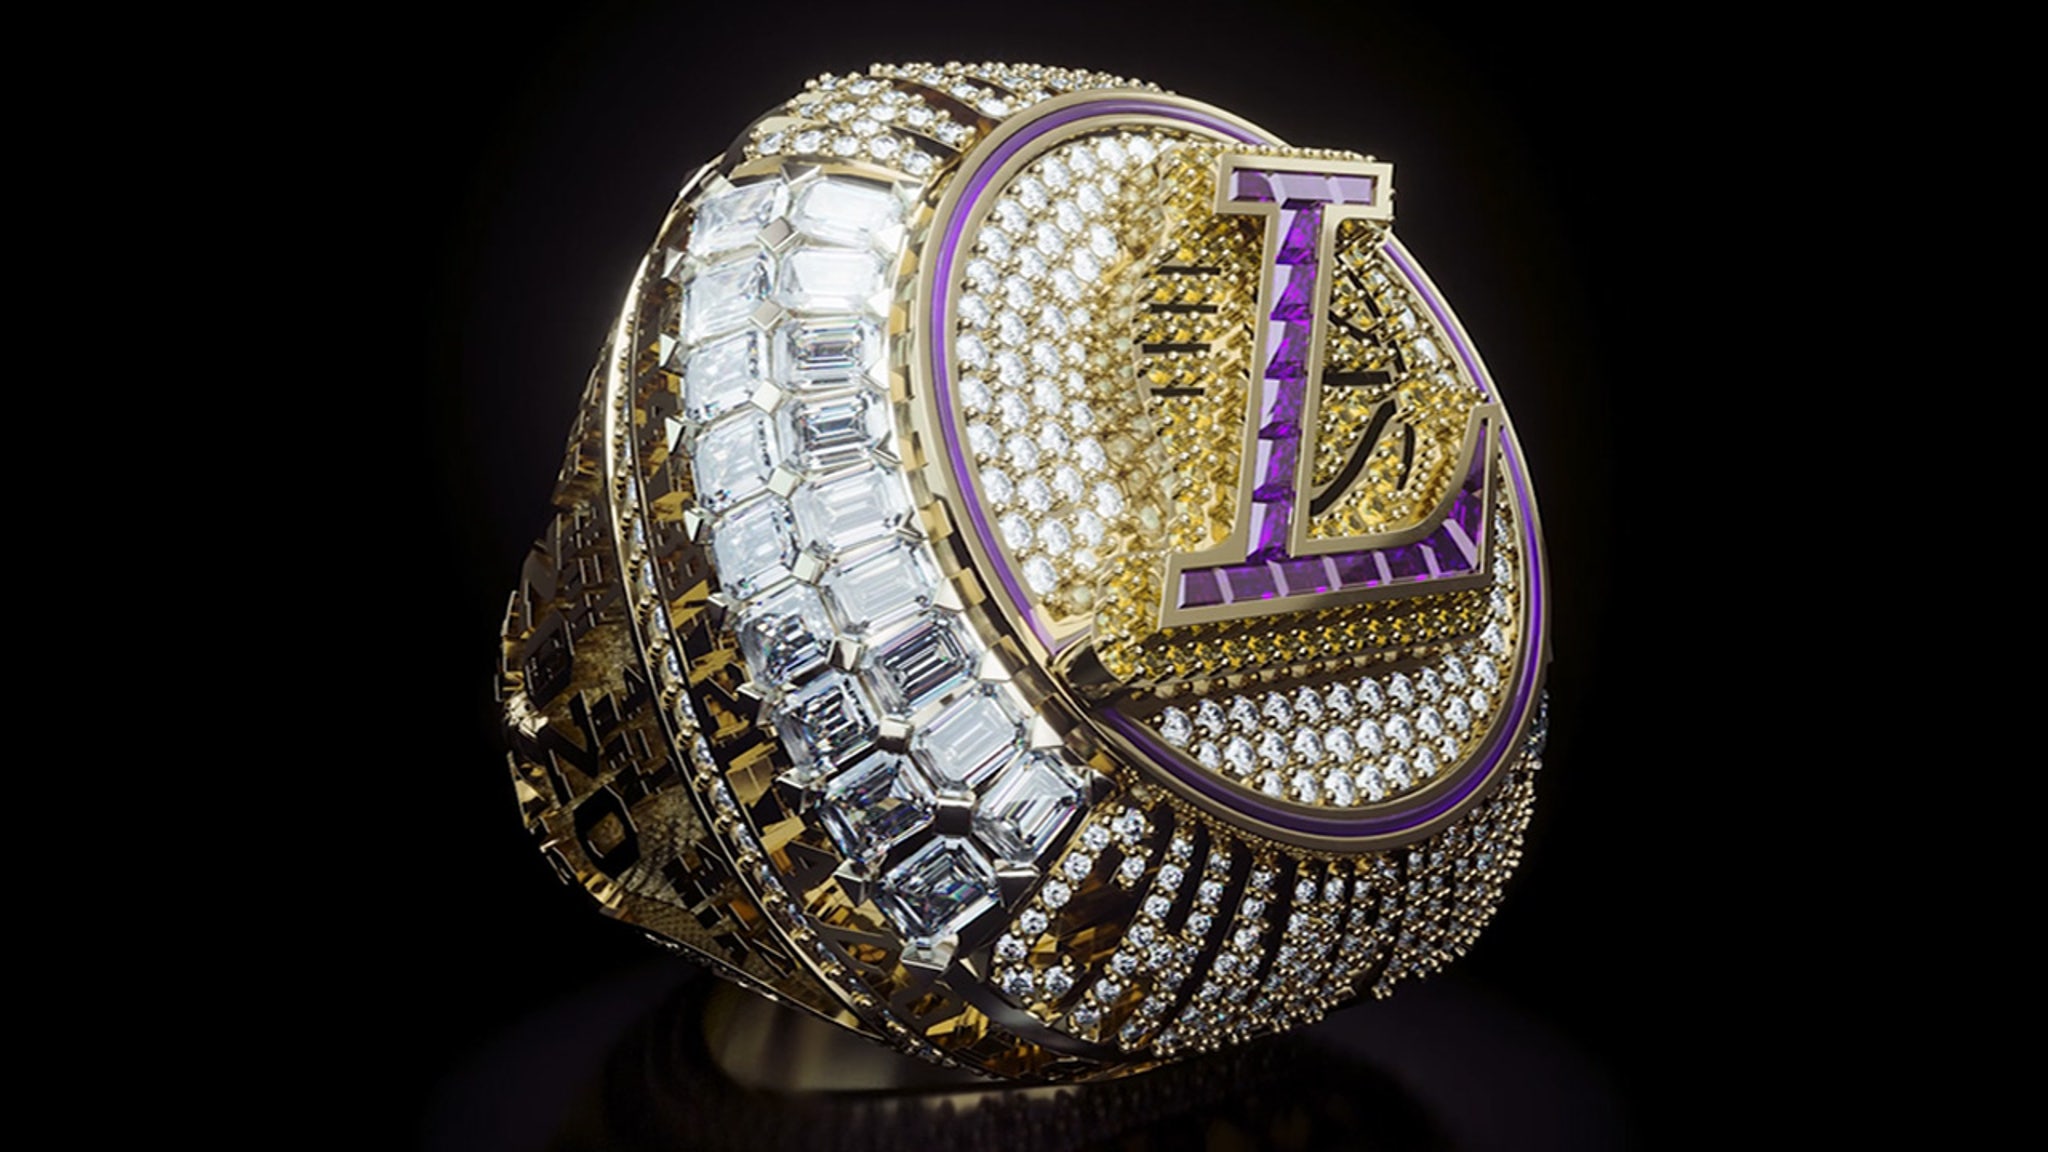 The LA Lakers 2019-20 Championship Rings: Everything We Know